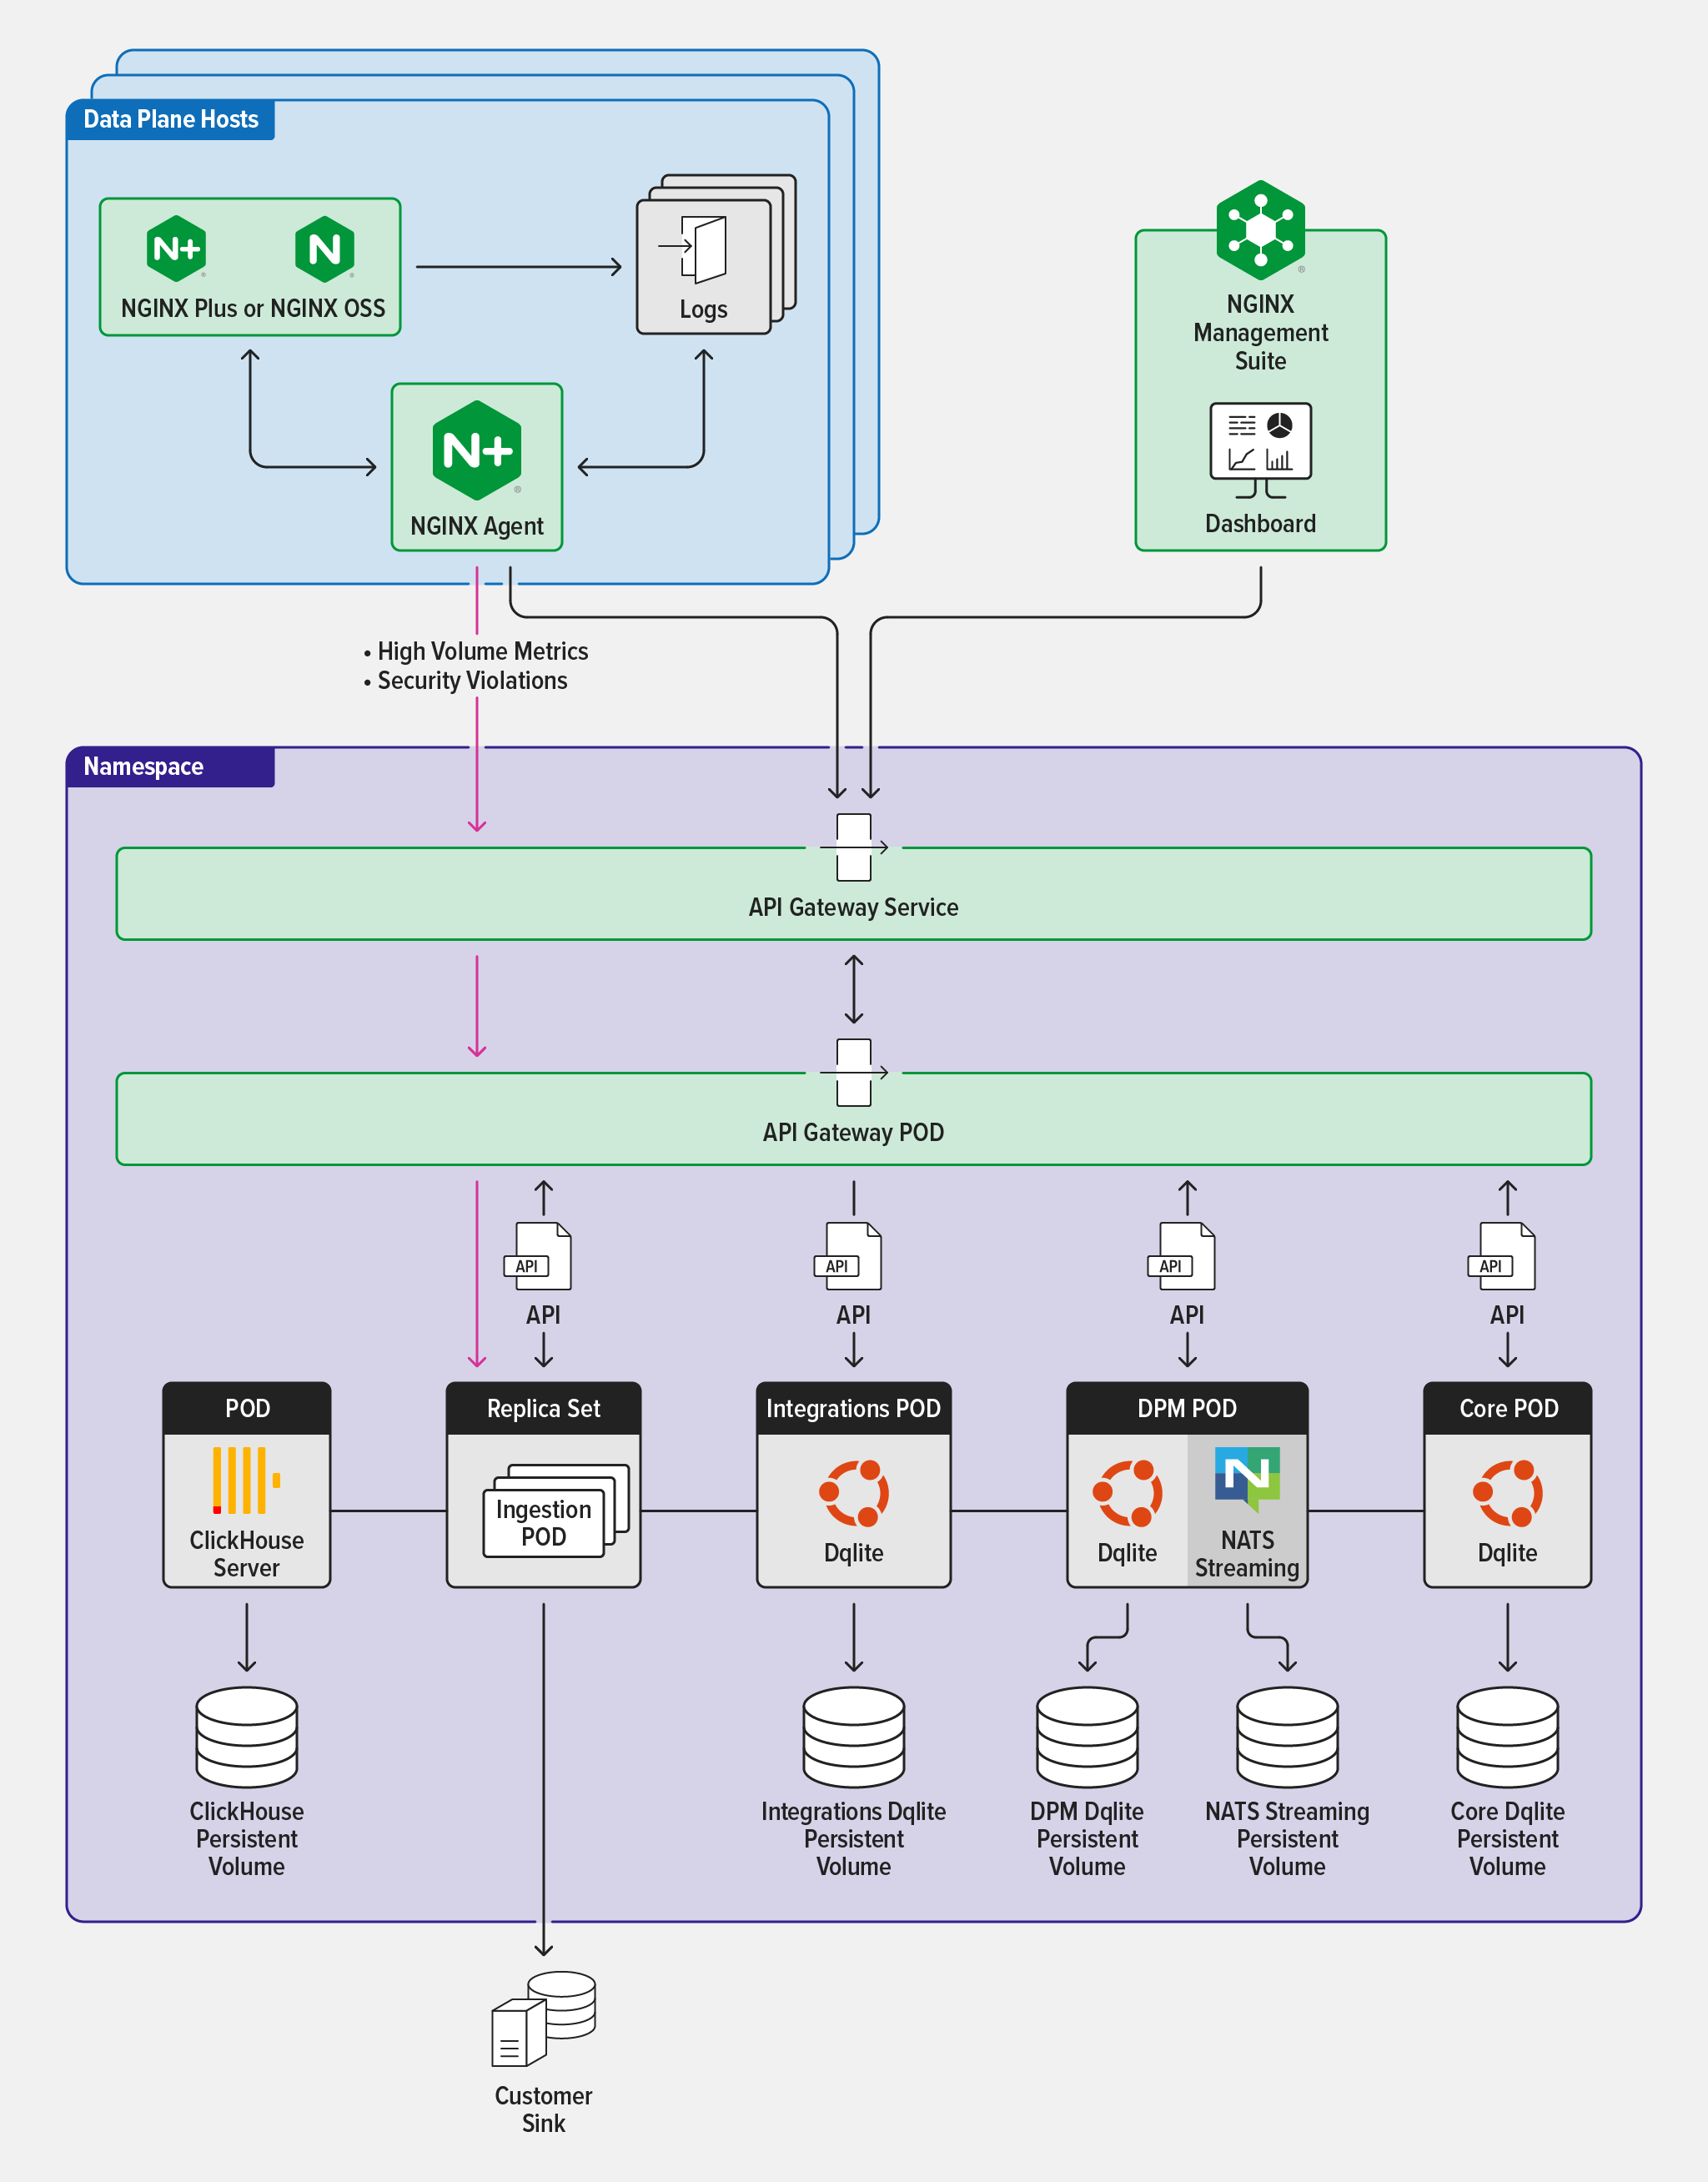 A diagram showing the architecture of the NGINX Management Suite's deployed on Kubernetes.